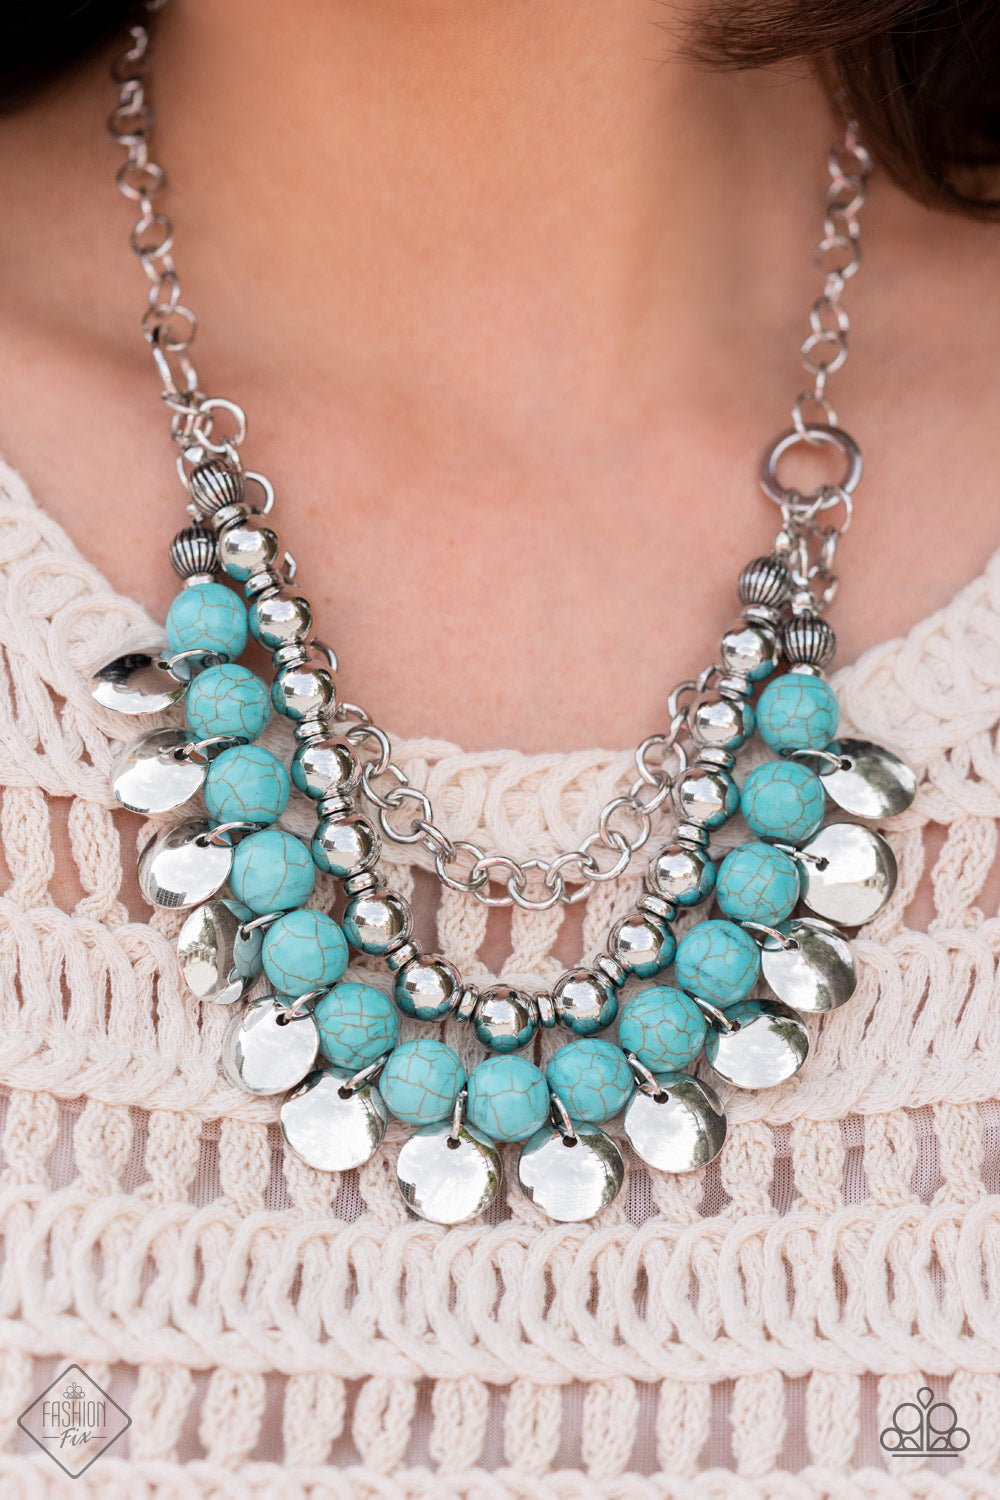 Paparazzi “Leave Her Wild” Blue Necklace  Earring Set